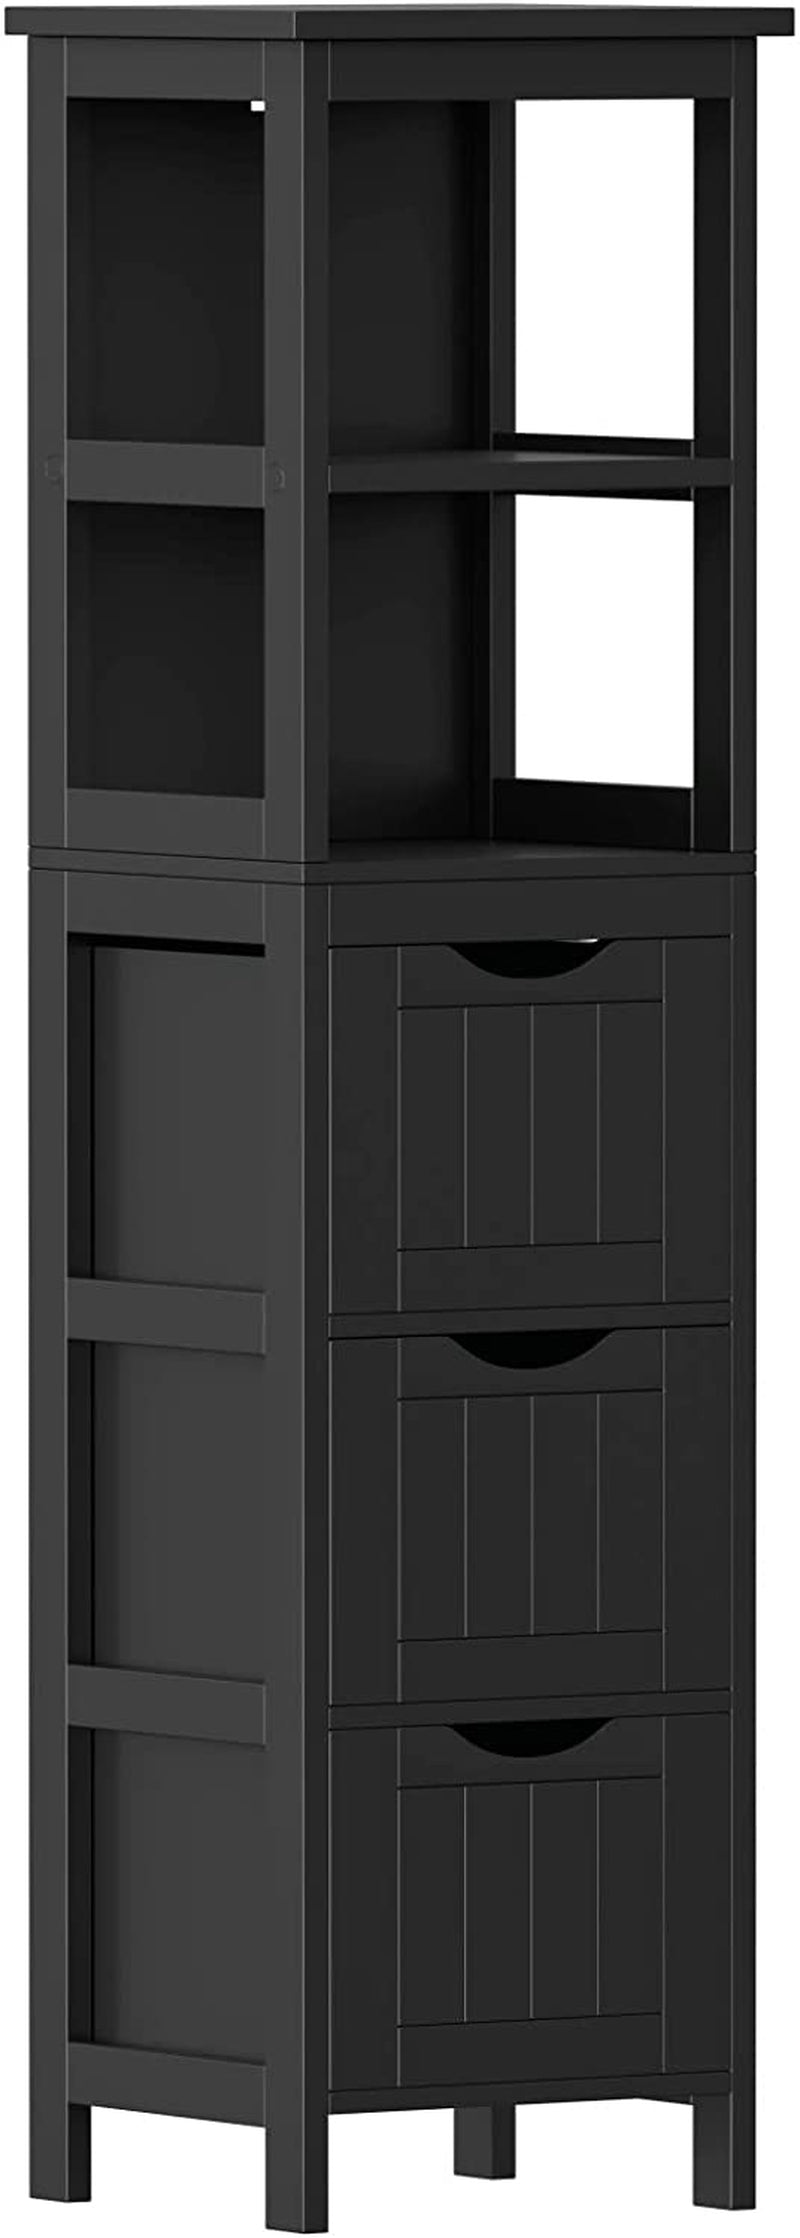 Reettic Narrow Bathroom Storage Cabinet with 3 Removable Drawers, DIY, Freestanding Side Storage Organizer for Bedroom, Living Room, Entryway, 11.8" L X 11.8" W X 35" H, Brown BYSG102Z Home & Garden > Household Supplies > Storage & Organization Reettic Black 11.8"L x 11.8"W x 56.3"H 